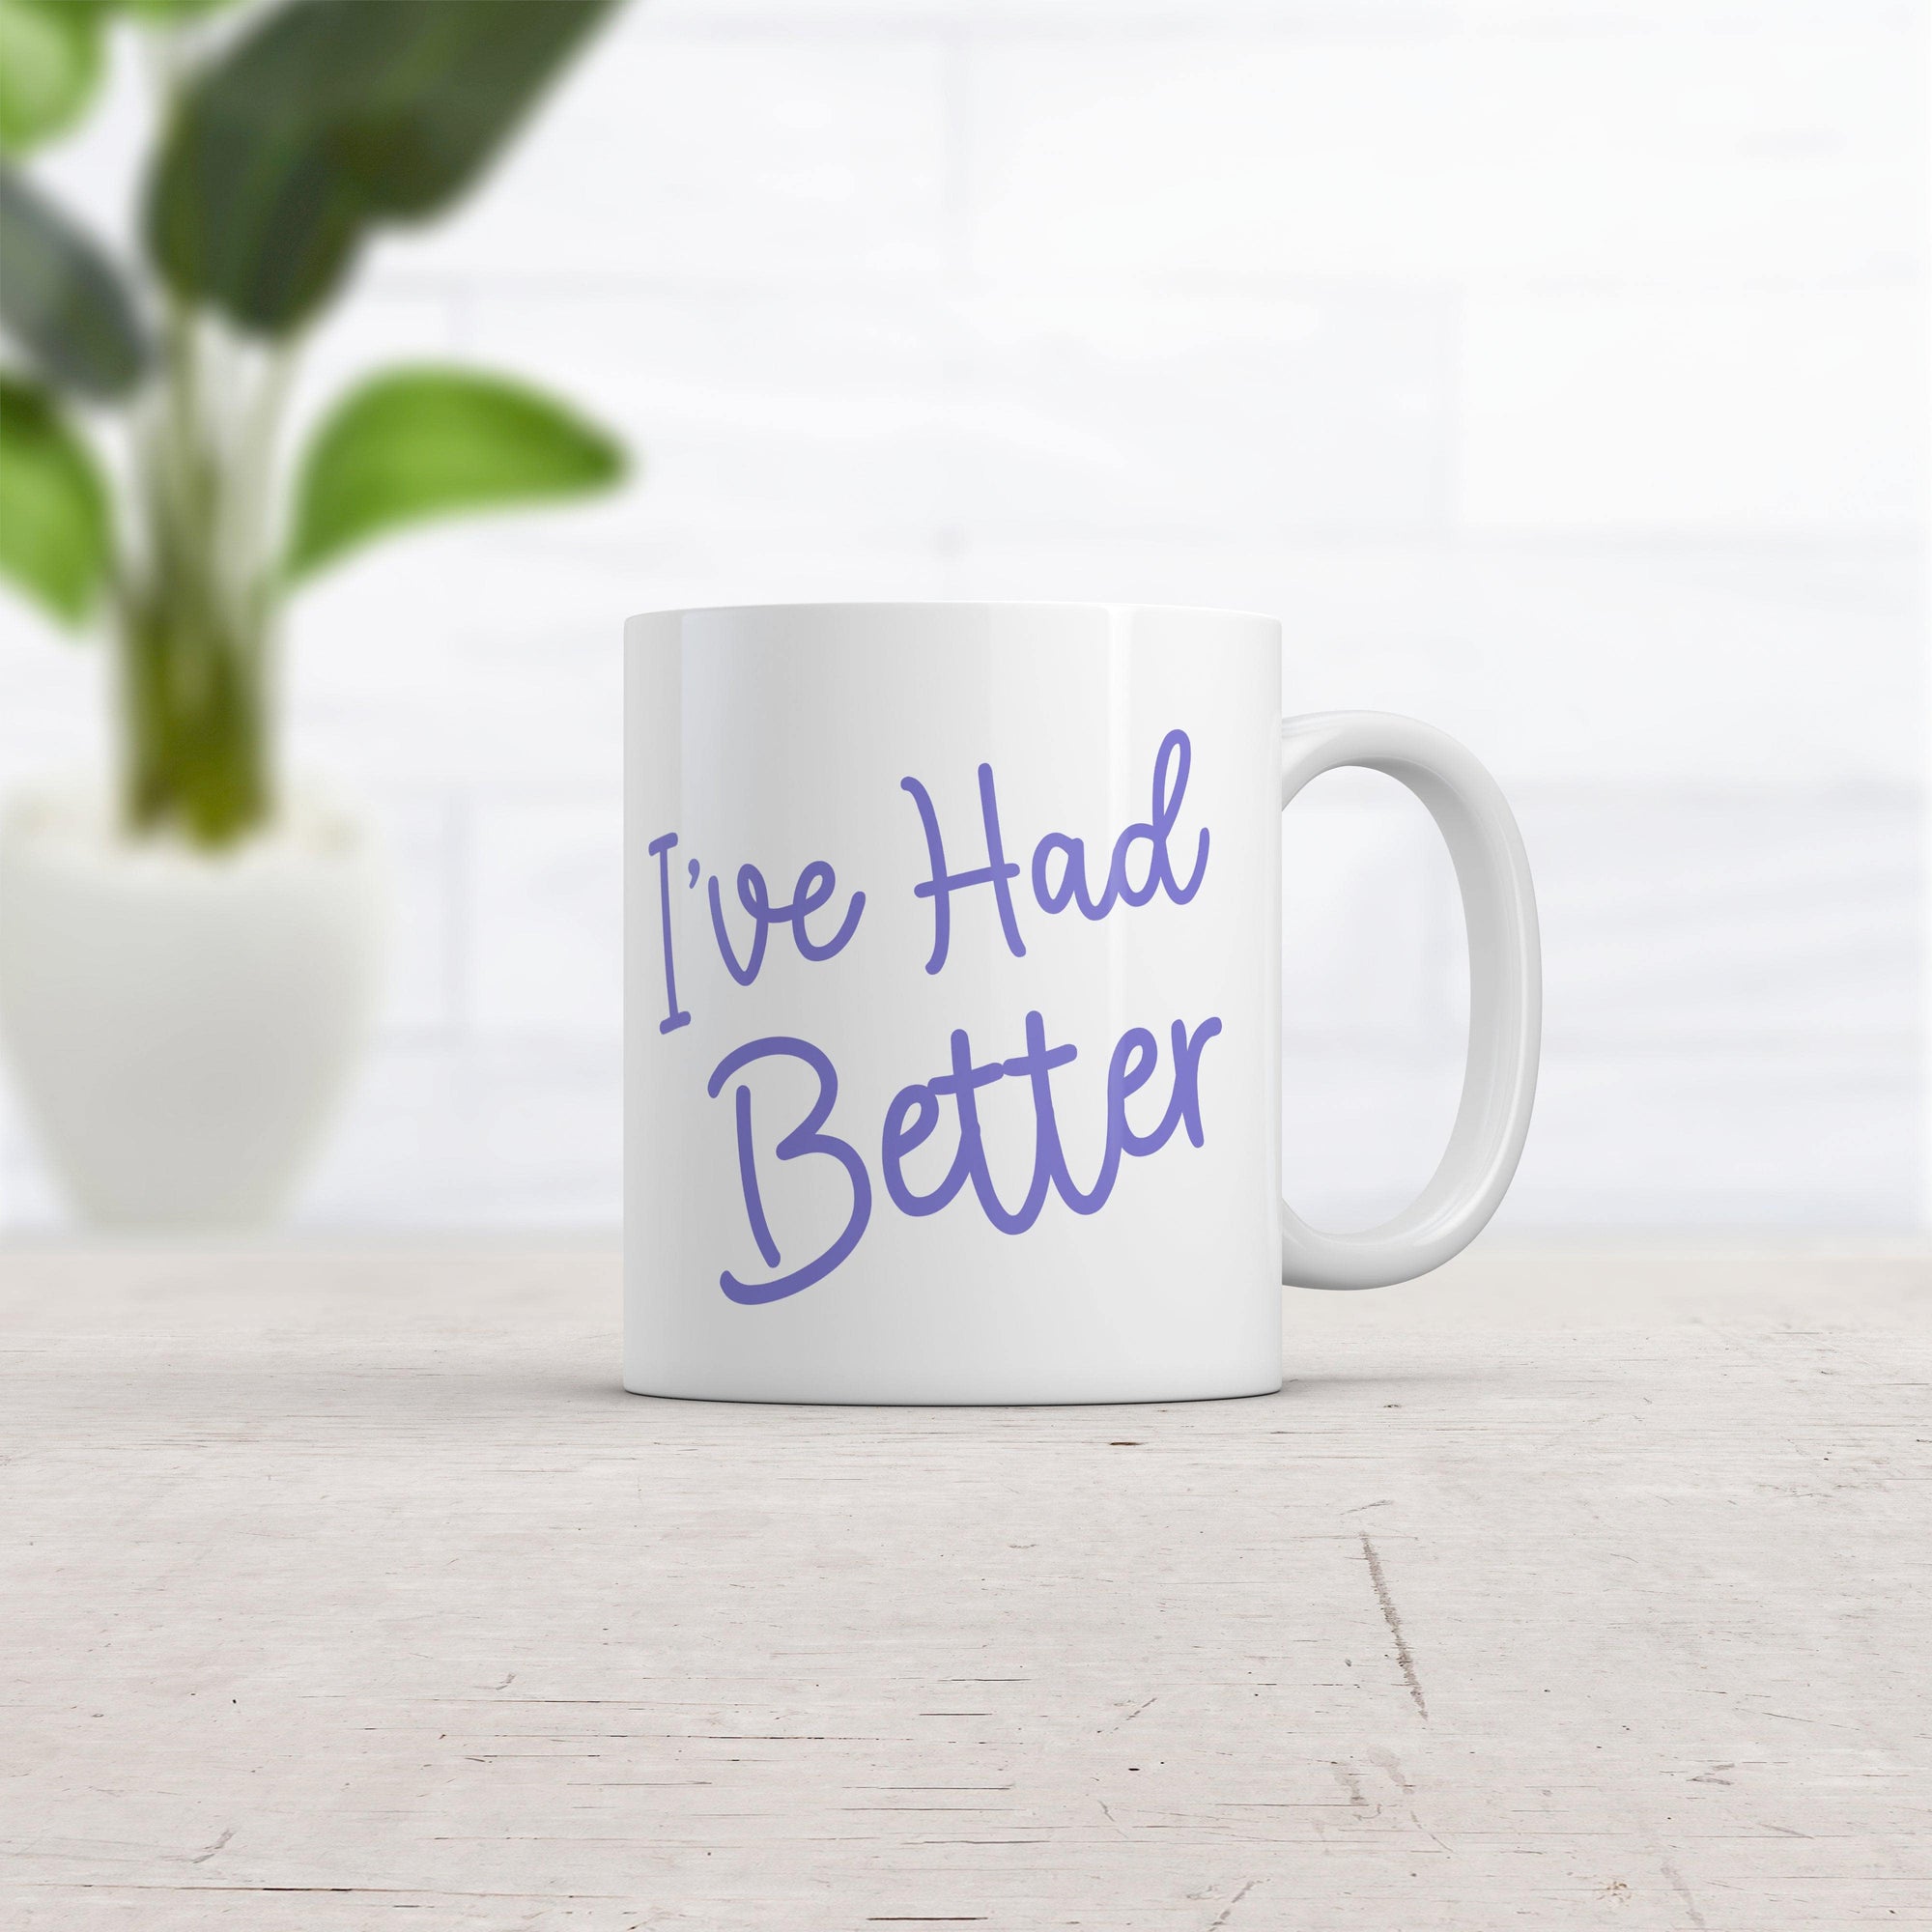 I've Had Better Mug Funny Offensive Insult Graphic Novelty Coffe Cup-11oz  -  Crazy Dog T-Shirts